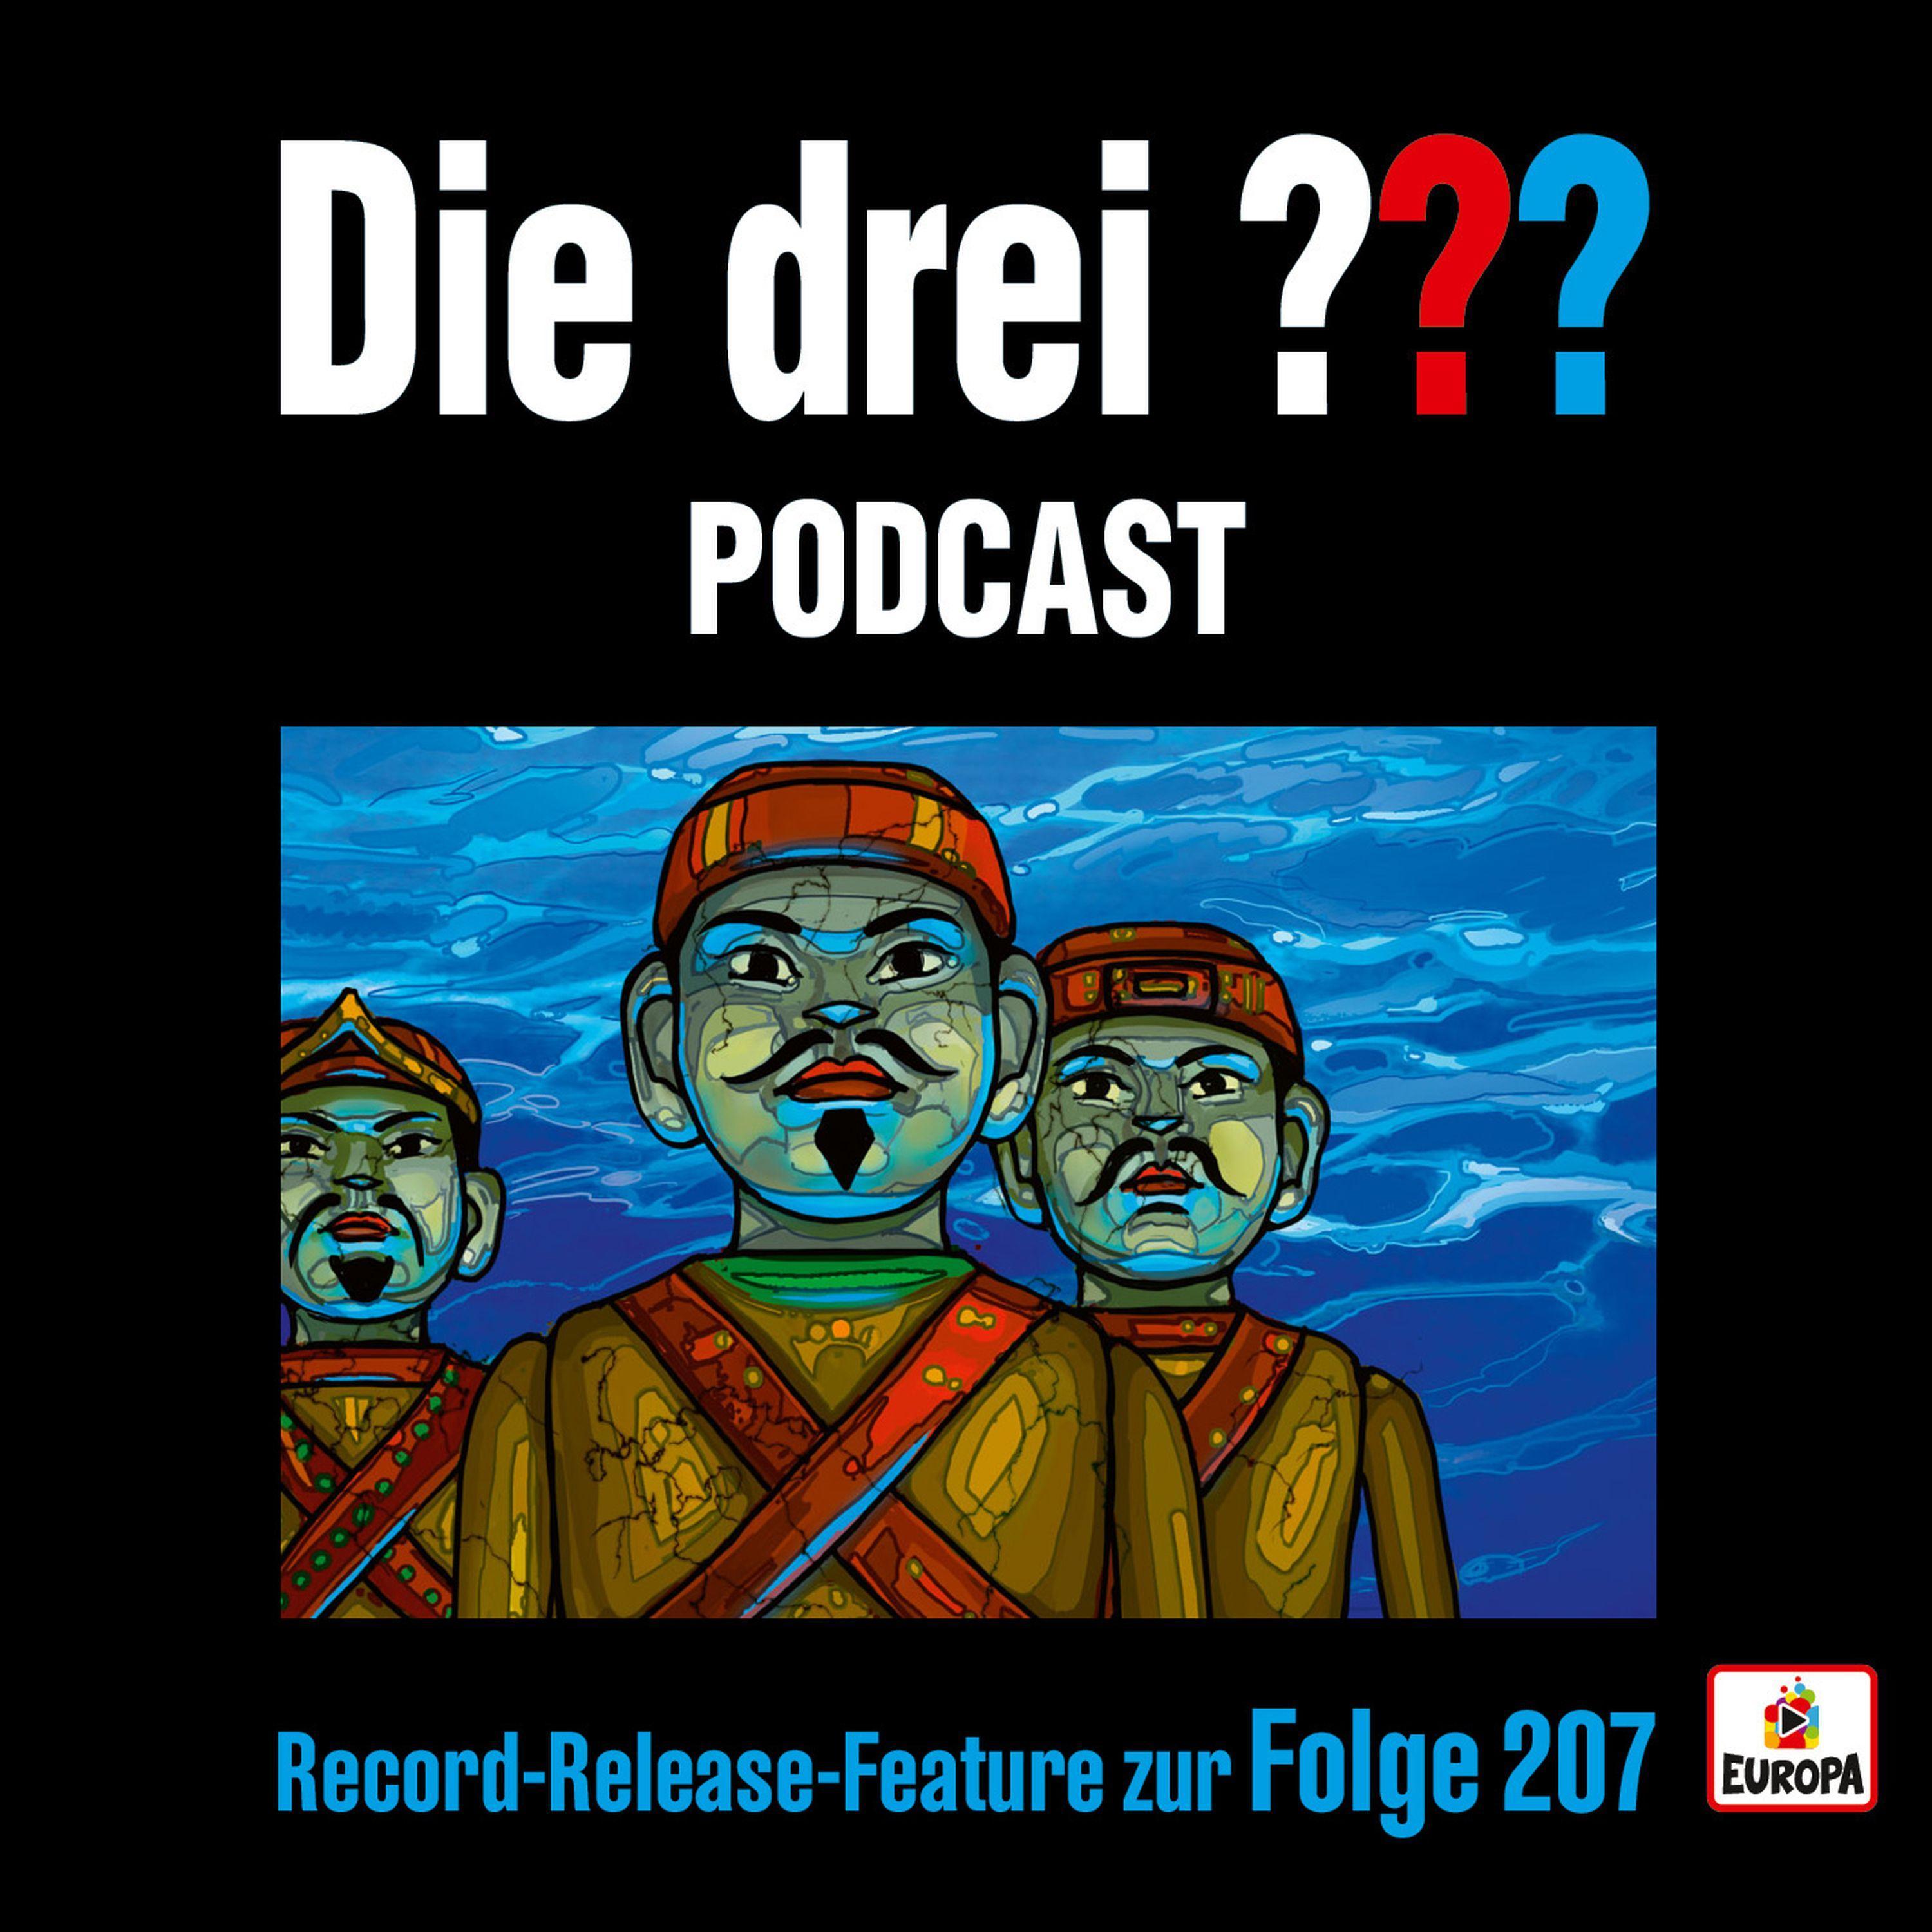 Record-Release-Feature zur Folge 207